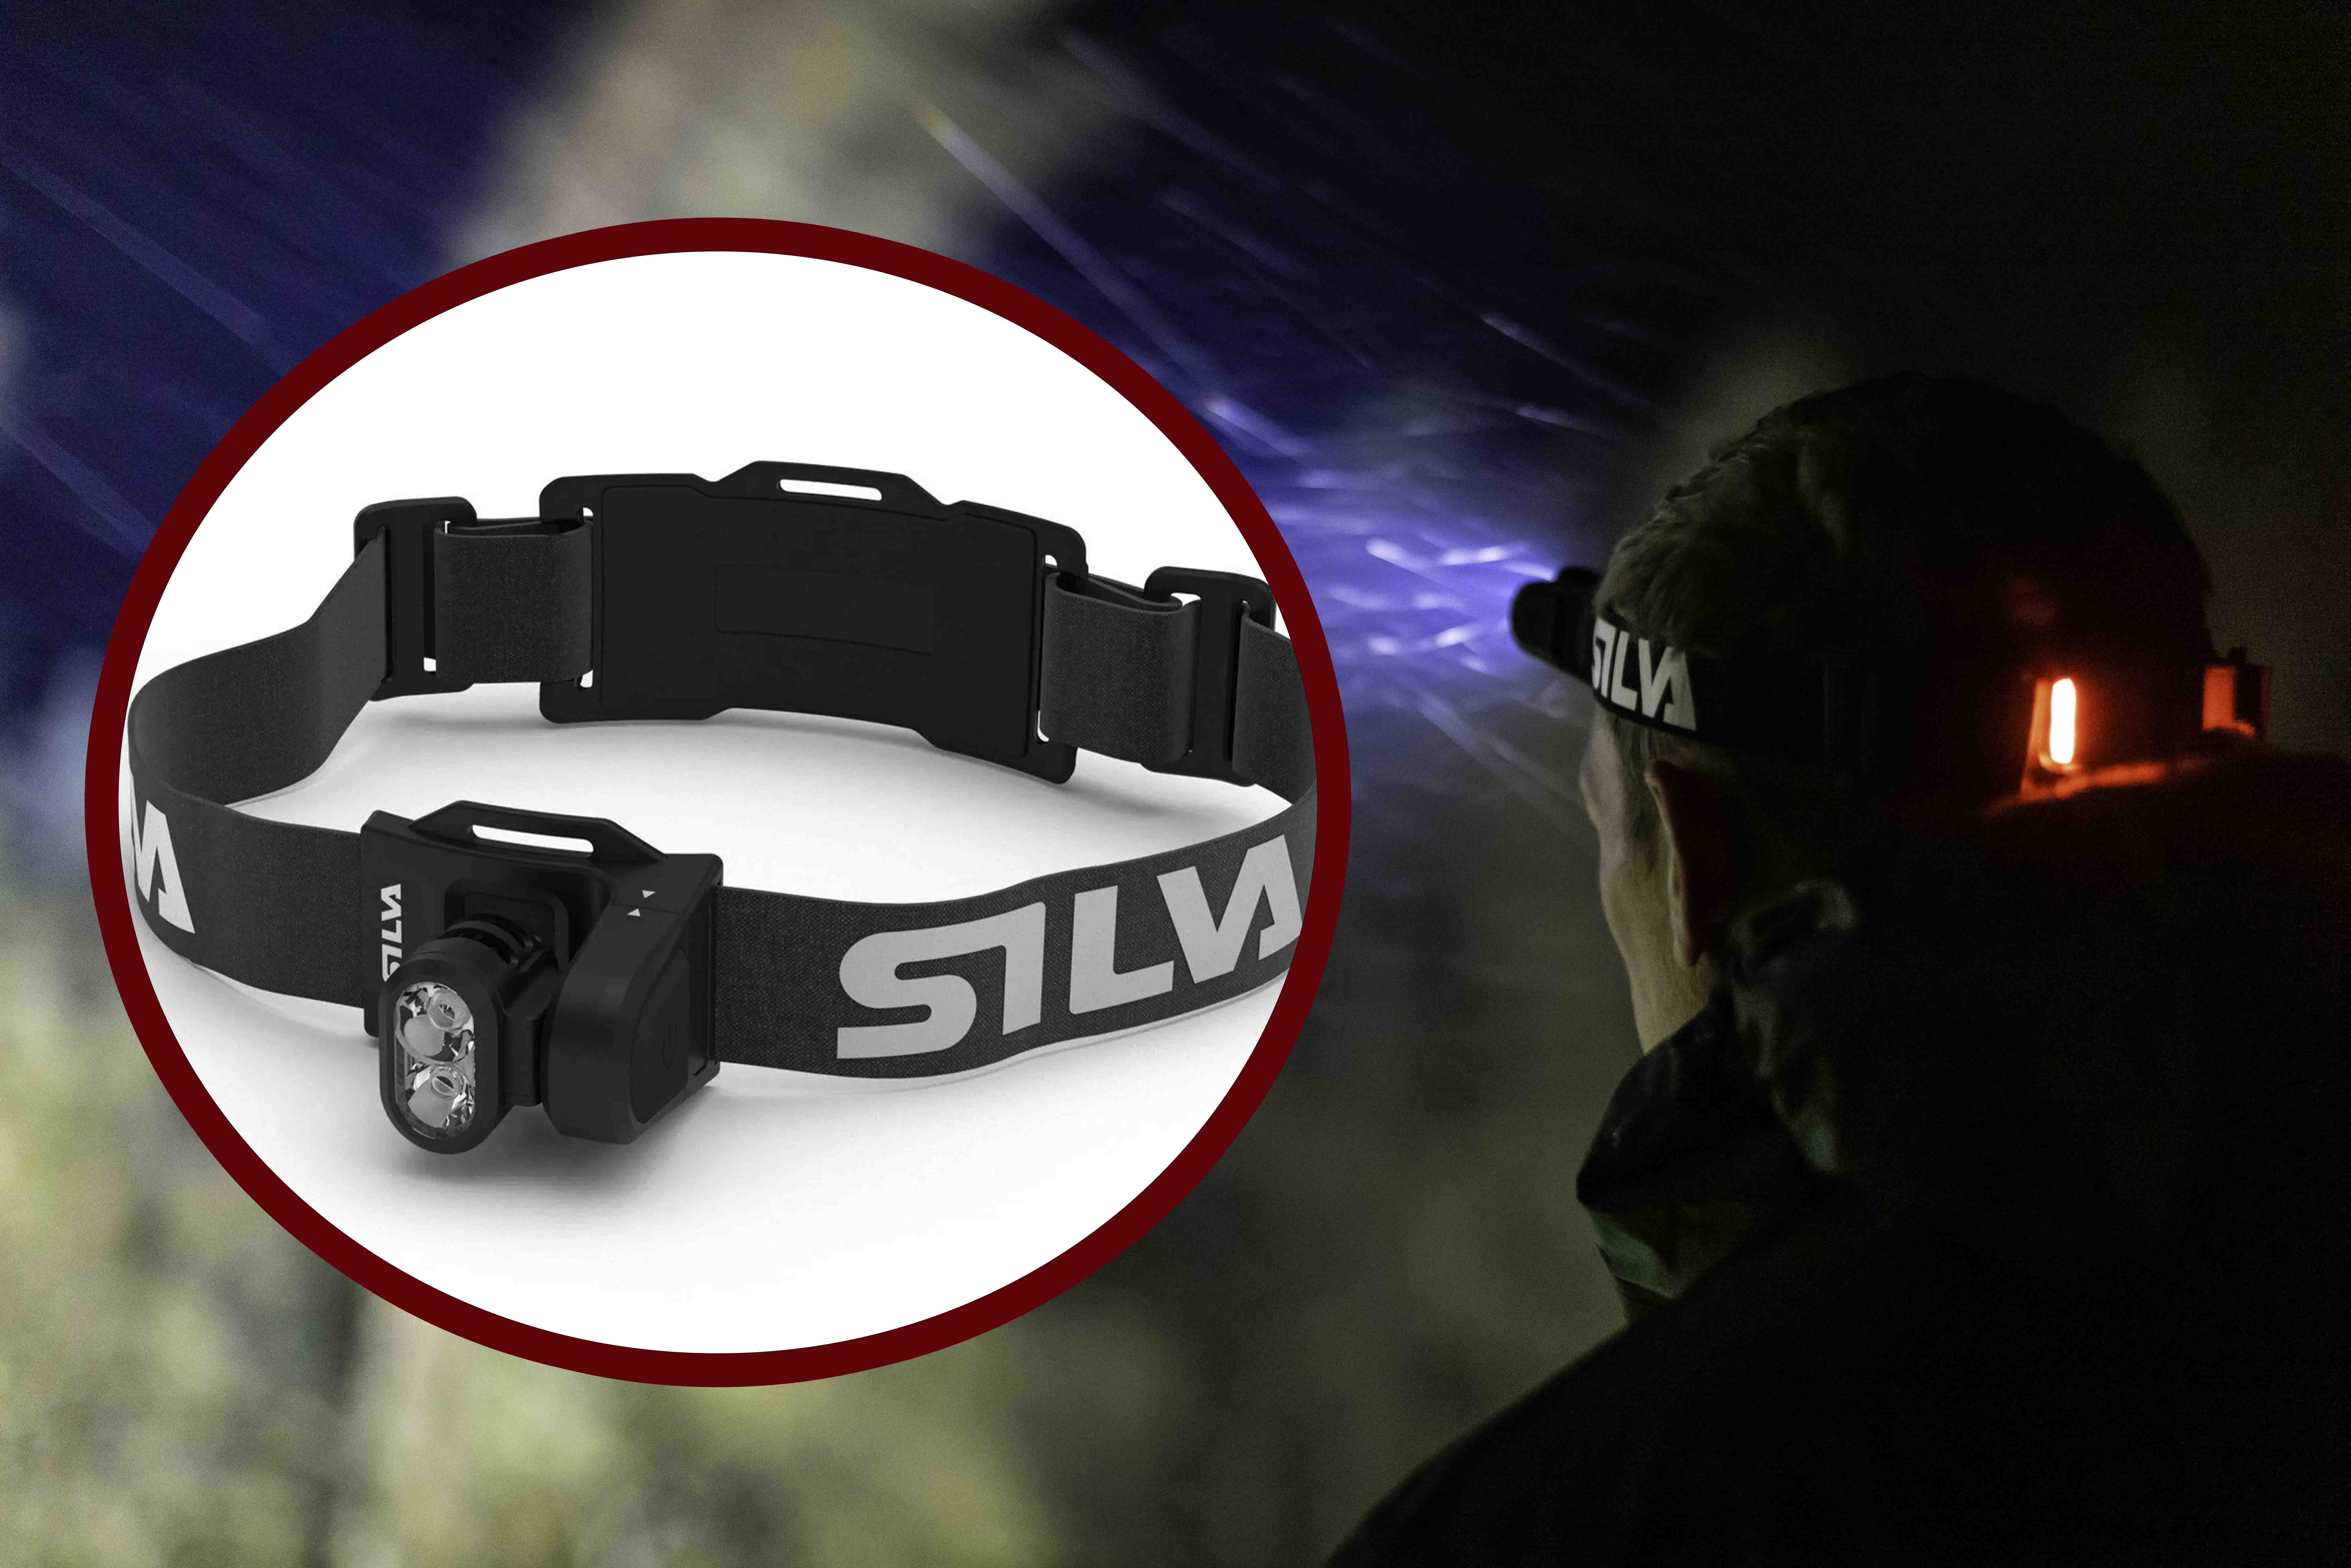 best head torches for hiking: Silva Free 1200 S